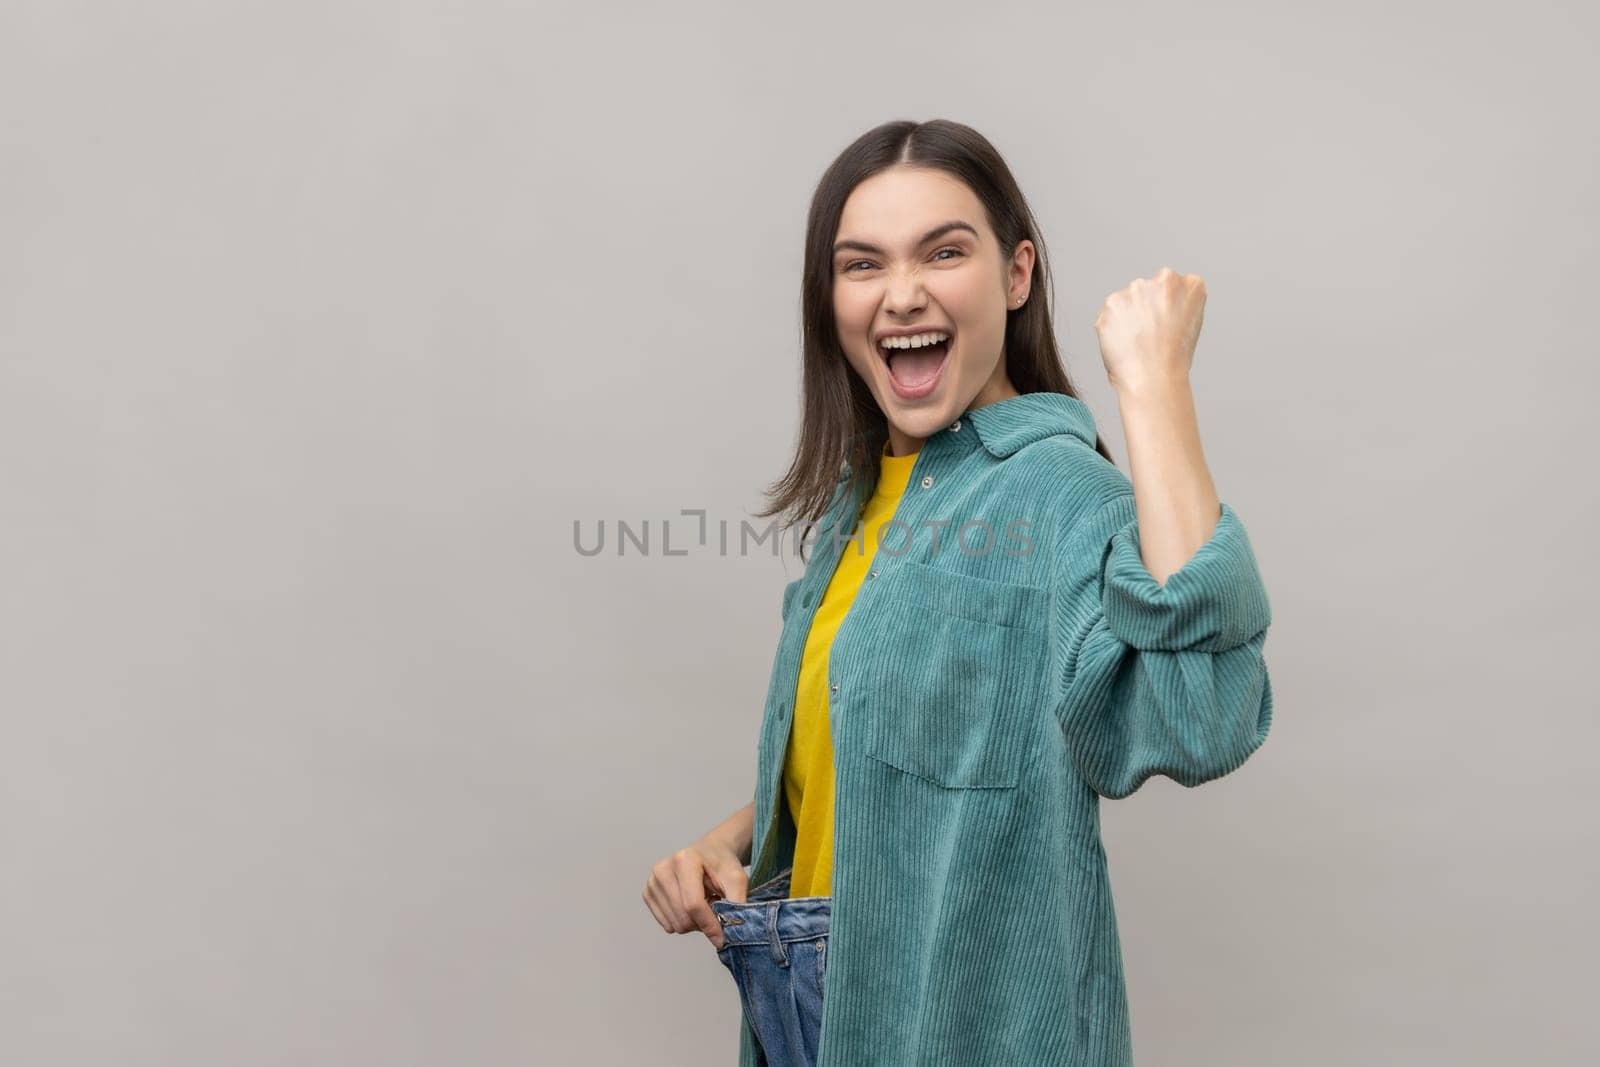 Attractive happy woman have willpower to loose weight, showing slim waist and clenched fist, celebrating, diet conception, wearing casual style jacket. Indoor studio shot isolated on gray background.